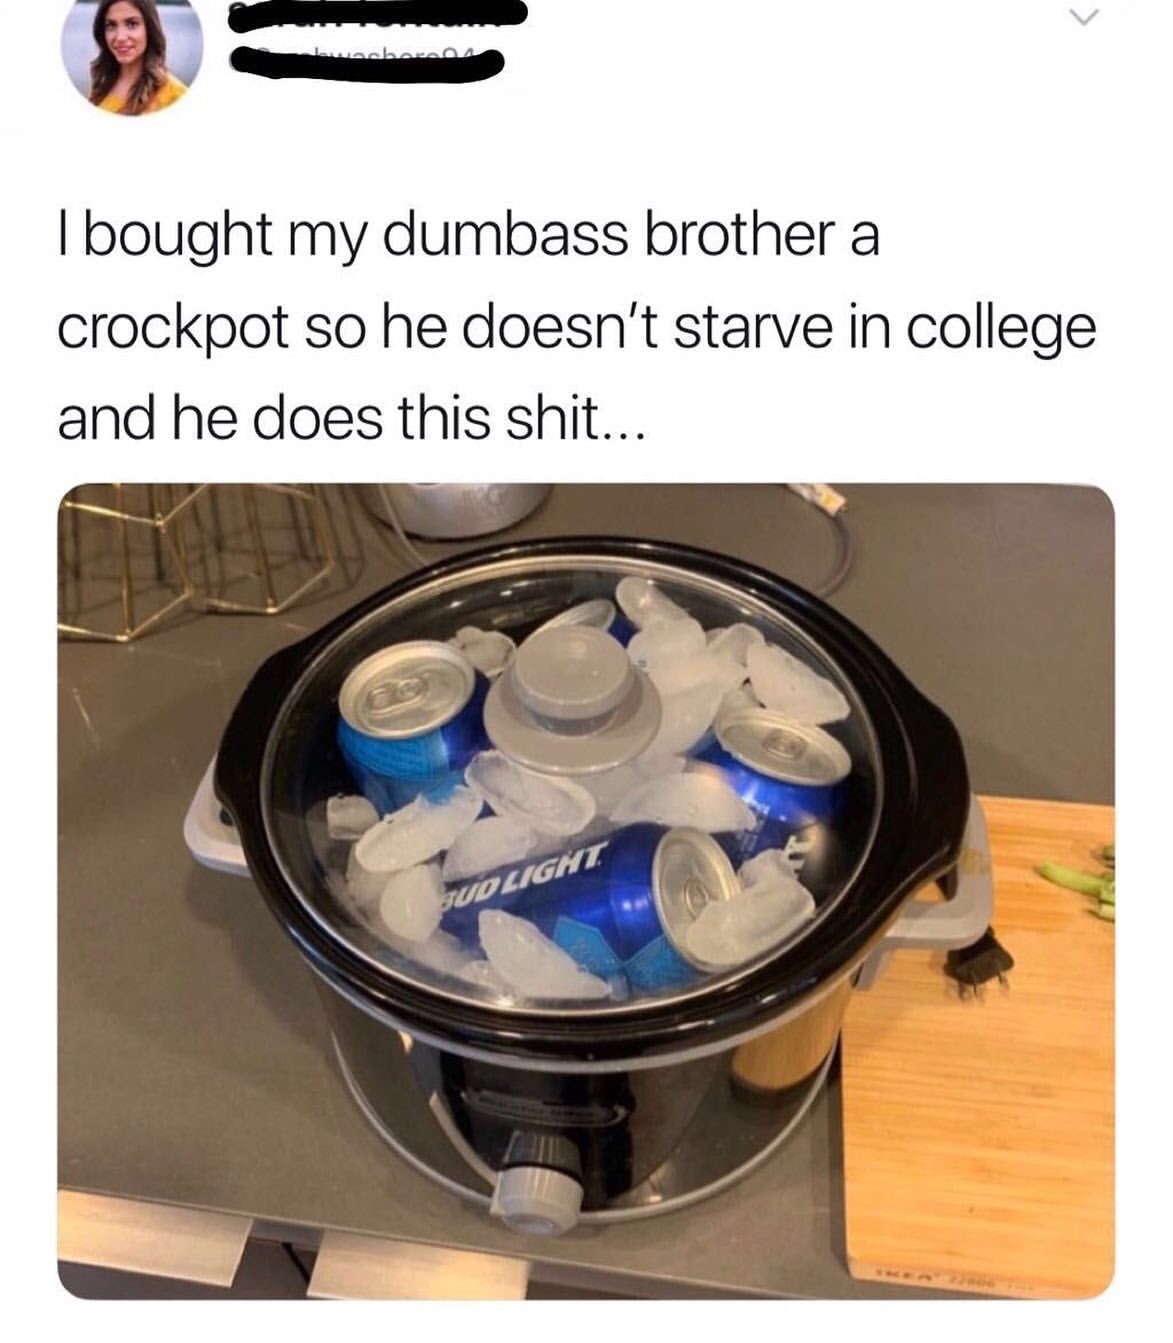 cookware and bakeware - I bought my dumbass brother a crockpot so he doesn't starve in college and he does this shit... Tud Light